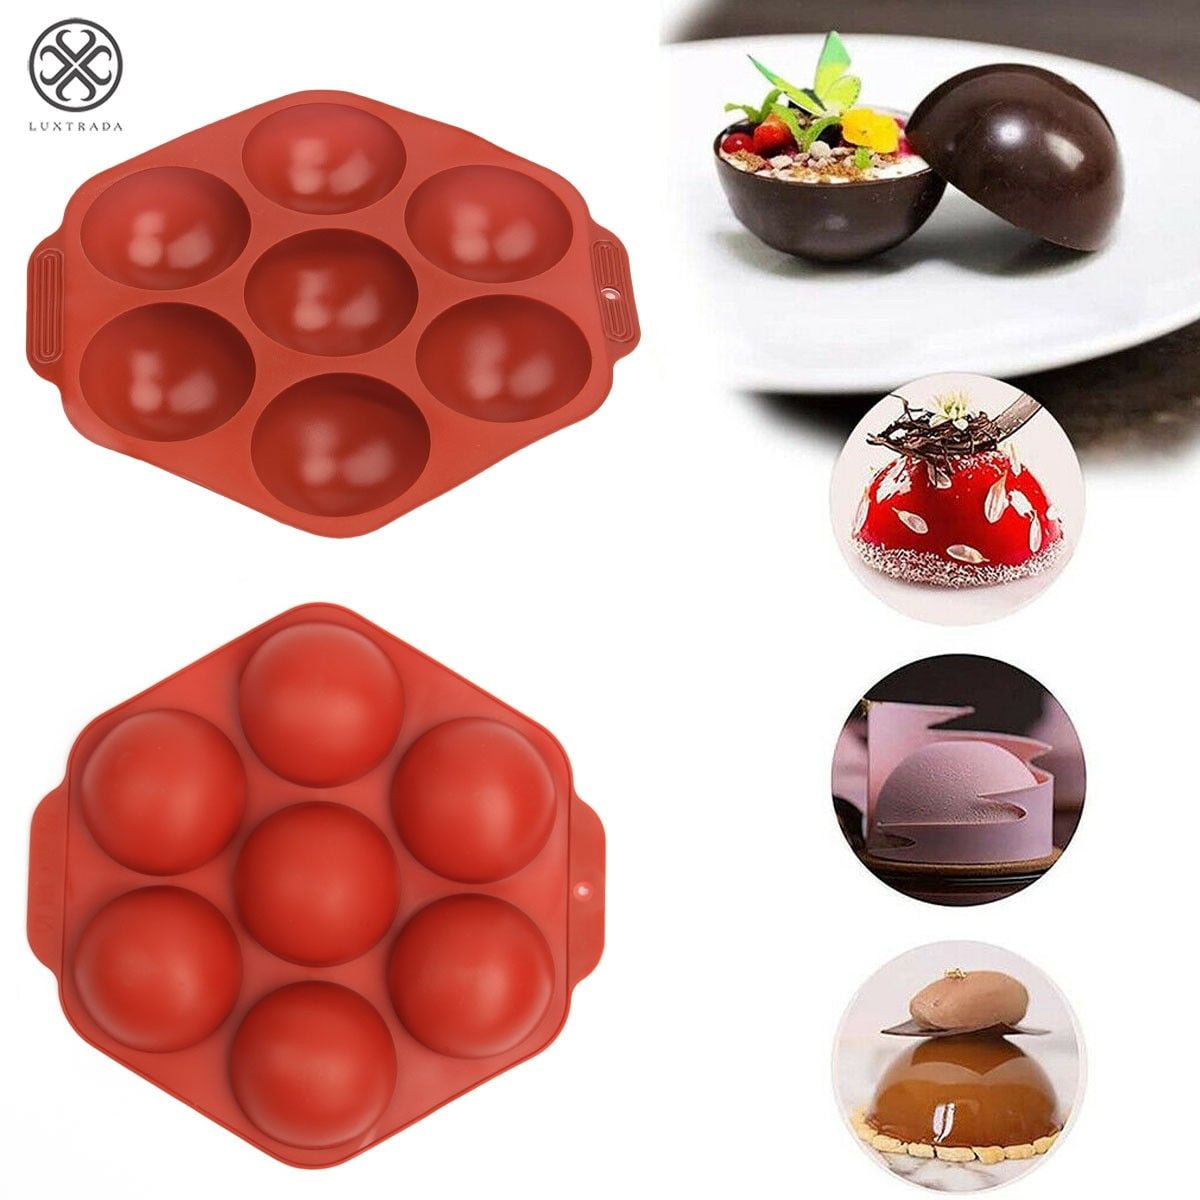 Half Ball Sphere Silicone Cake Mold Chocolate Cookie Ice Candy Baking Mould US 